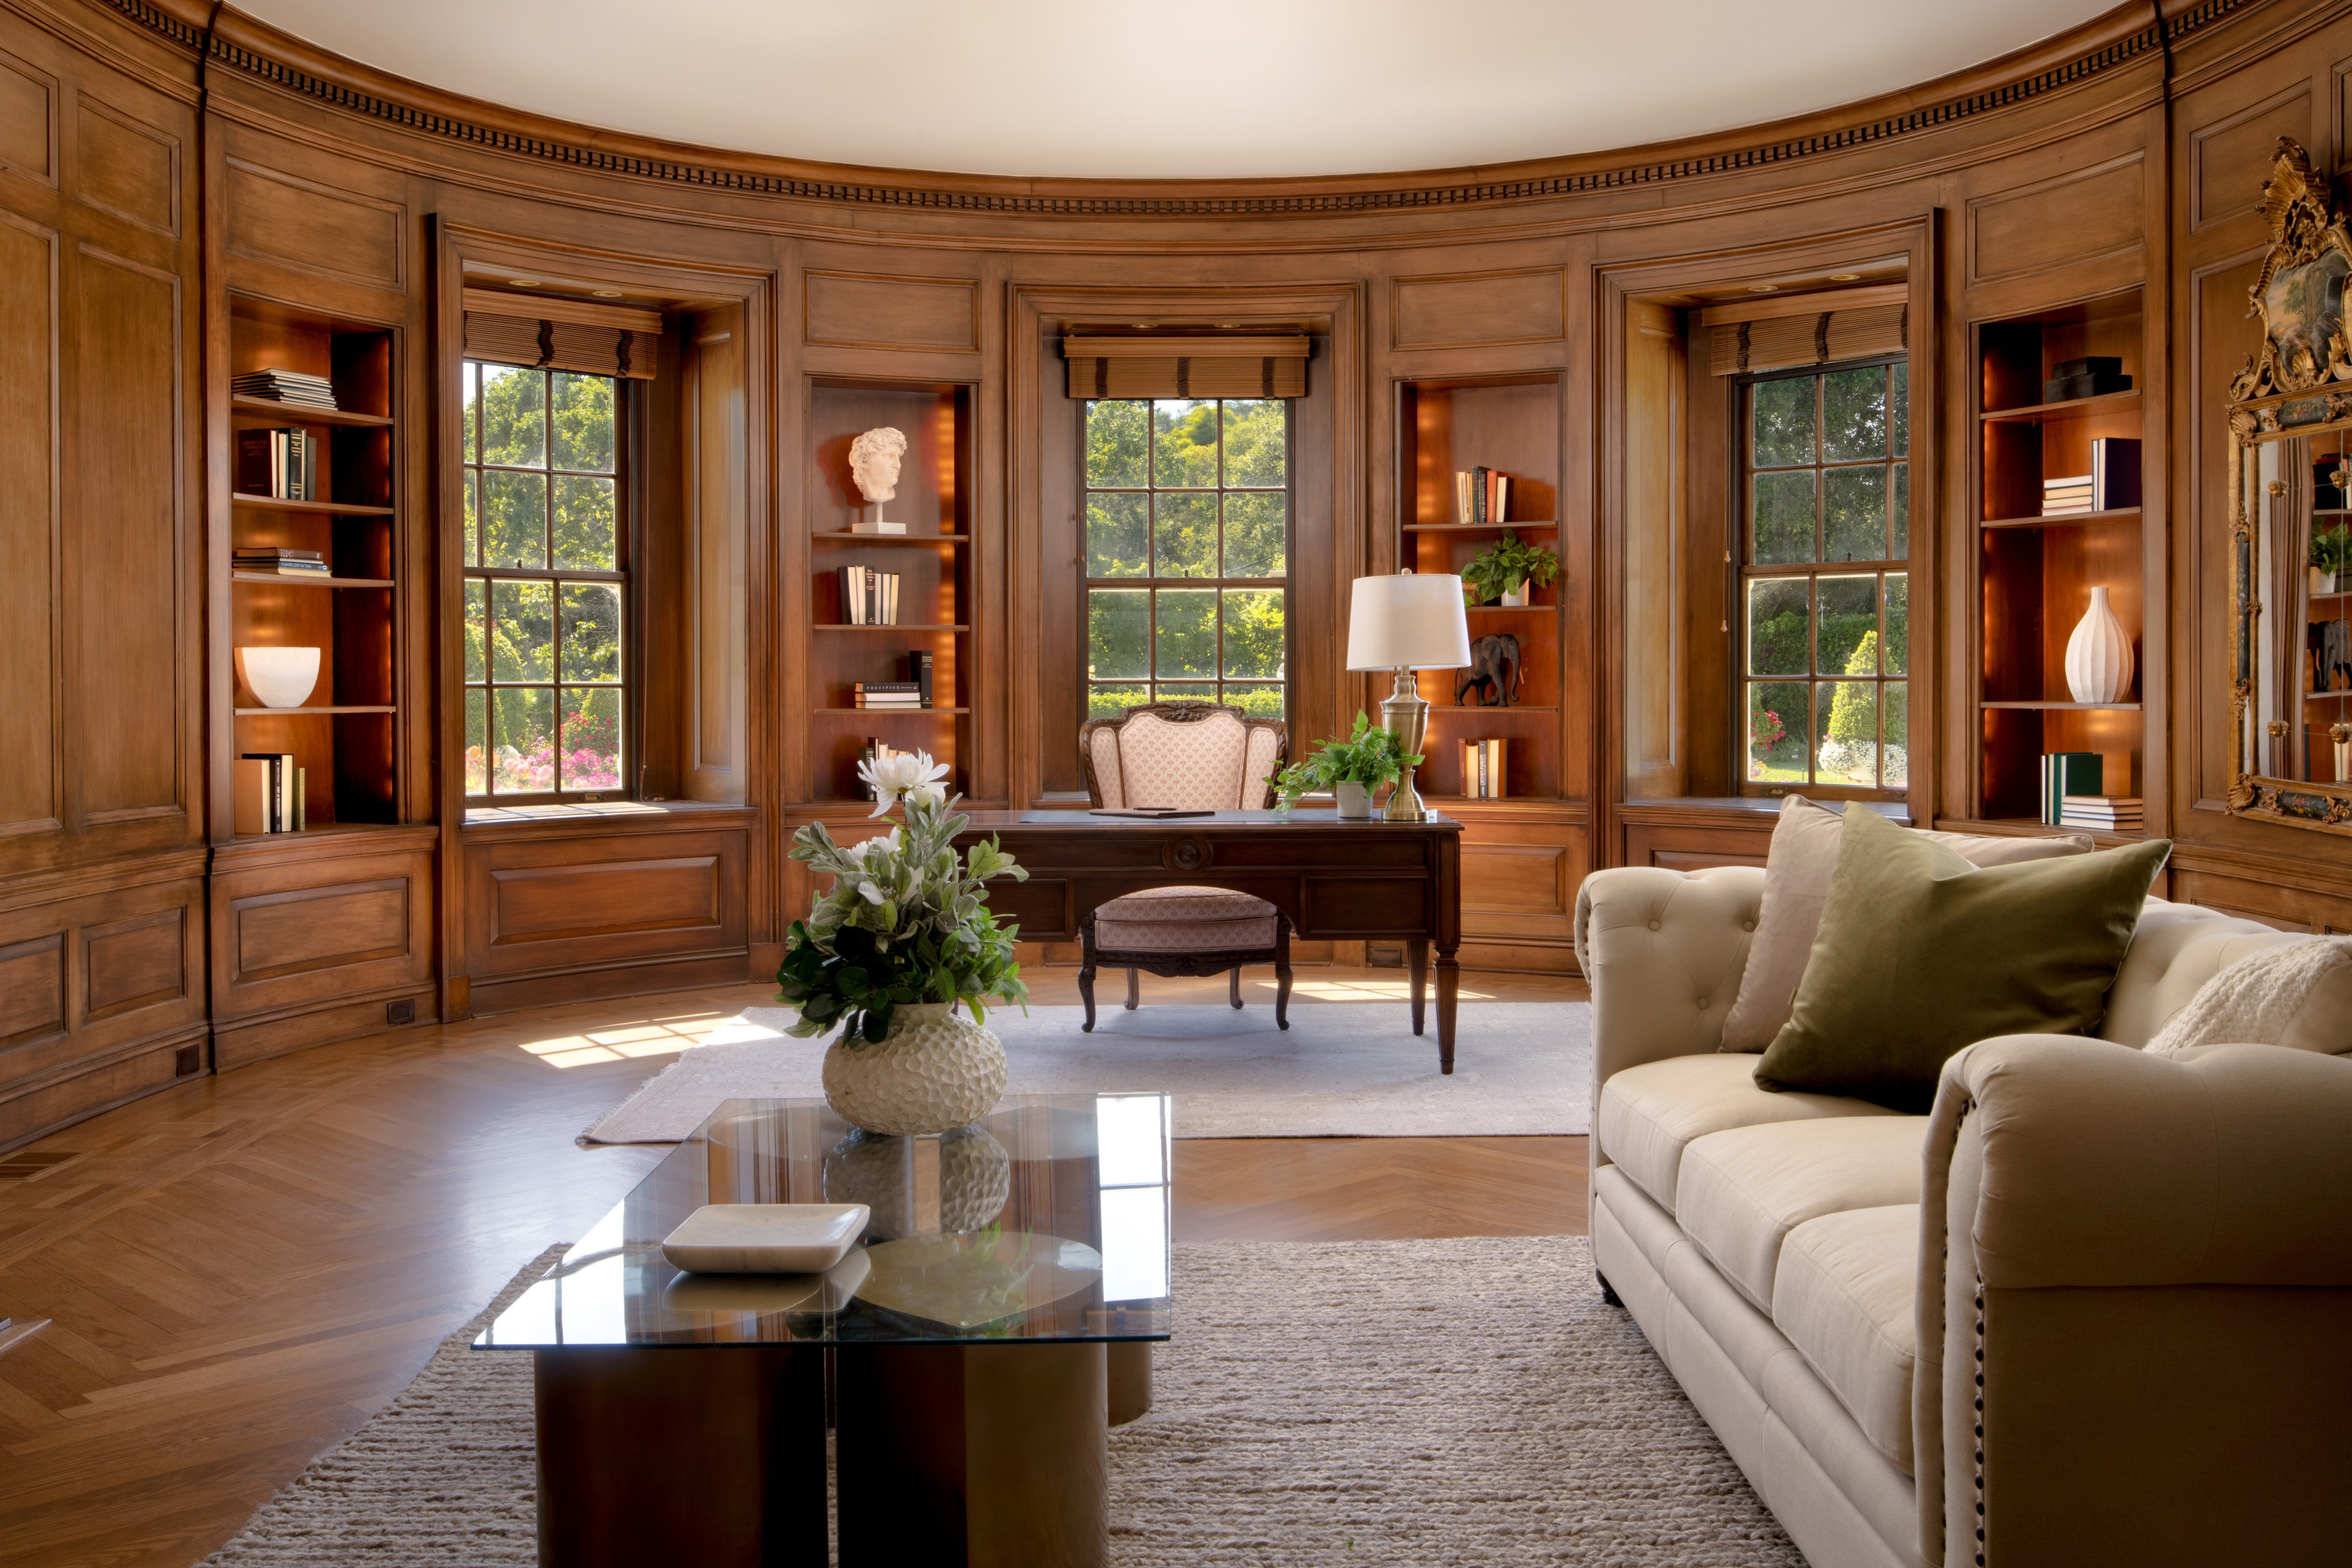 An estate room with a wood-lined, window-ringed interior looks out on a sunny tree-lined yard